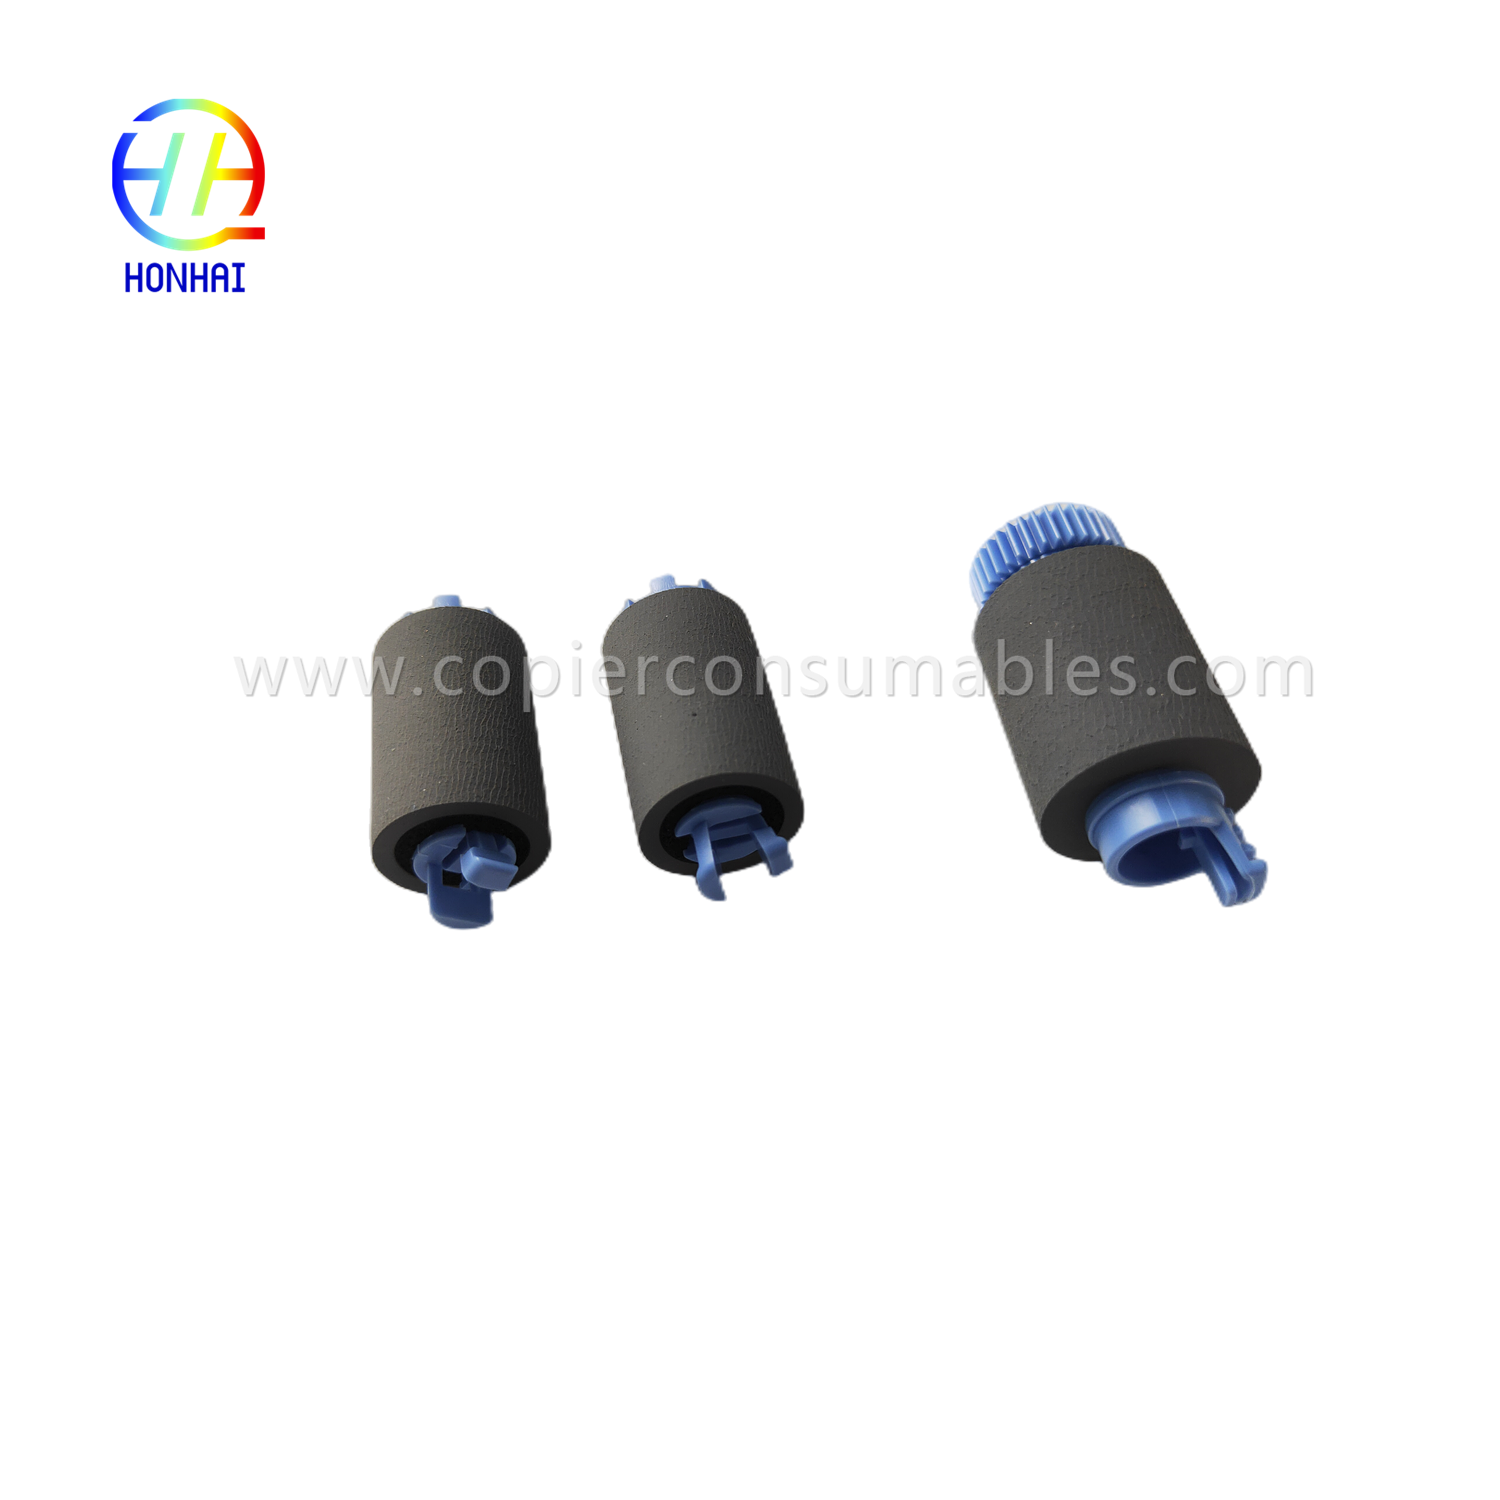 https://c585.goodao.net/tray-2-5-pickup-feed-separation-roller-set-for-hp-a7w93-67082-mfp-785f-780dn-e77650z-e77660z-e77650dn-e77660dn-p77740dn-p77750z-p77760z-p75050dn-p75050dw-product/